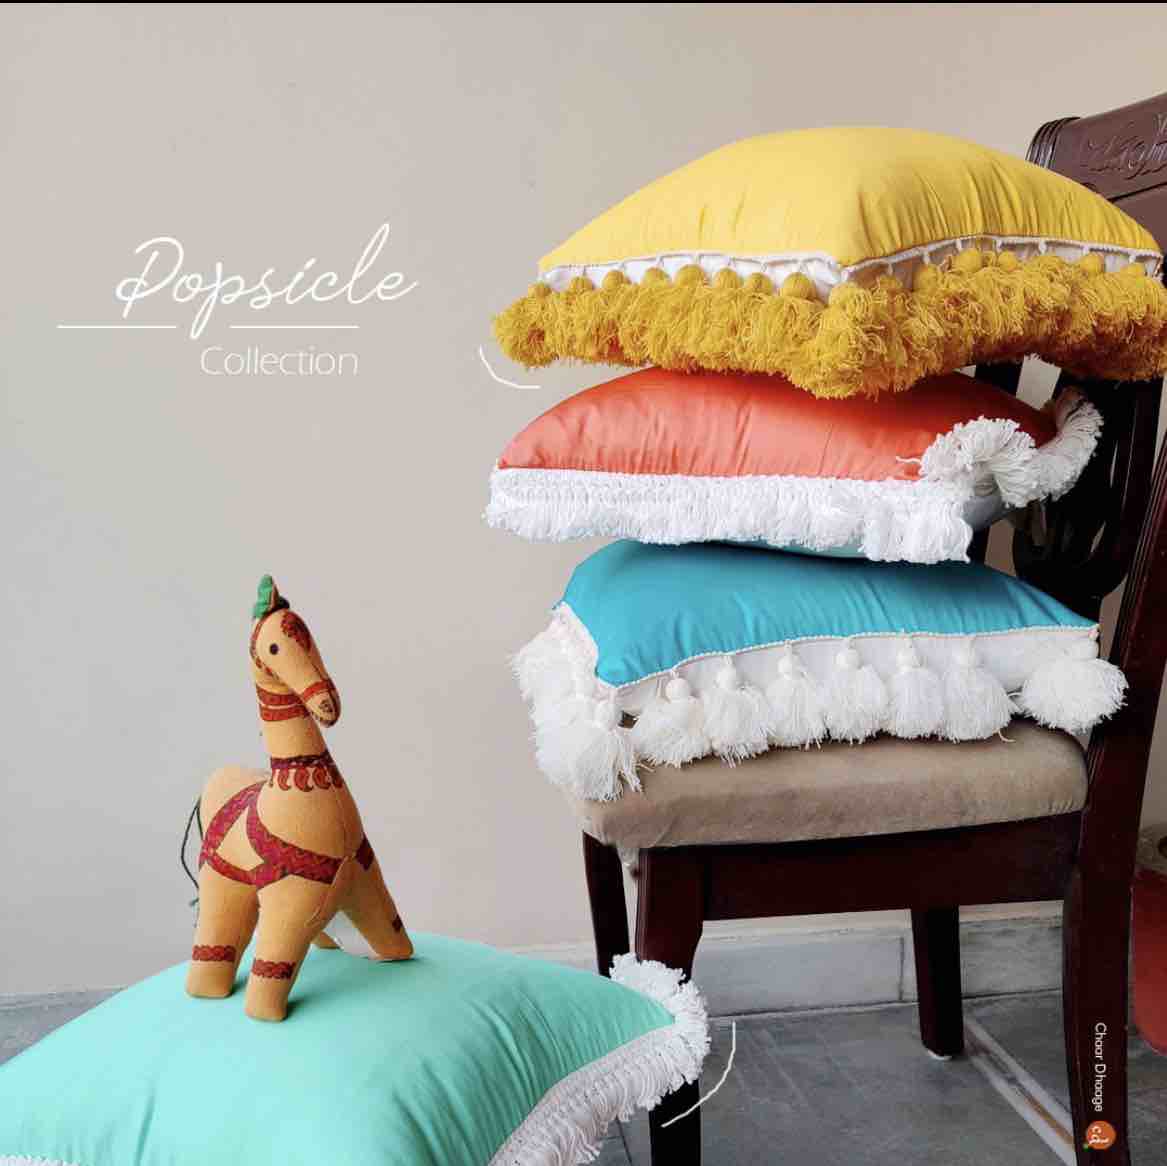 Popsicle Collection by chaar dhaage